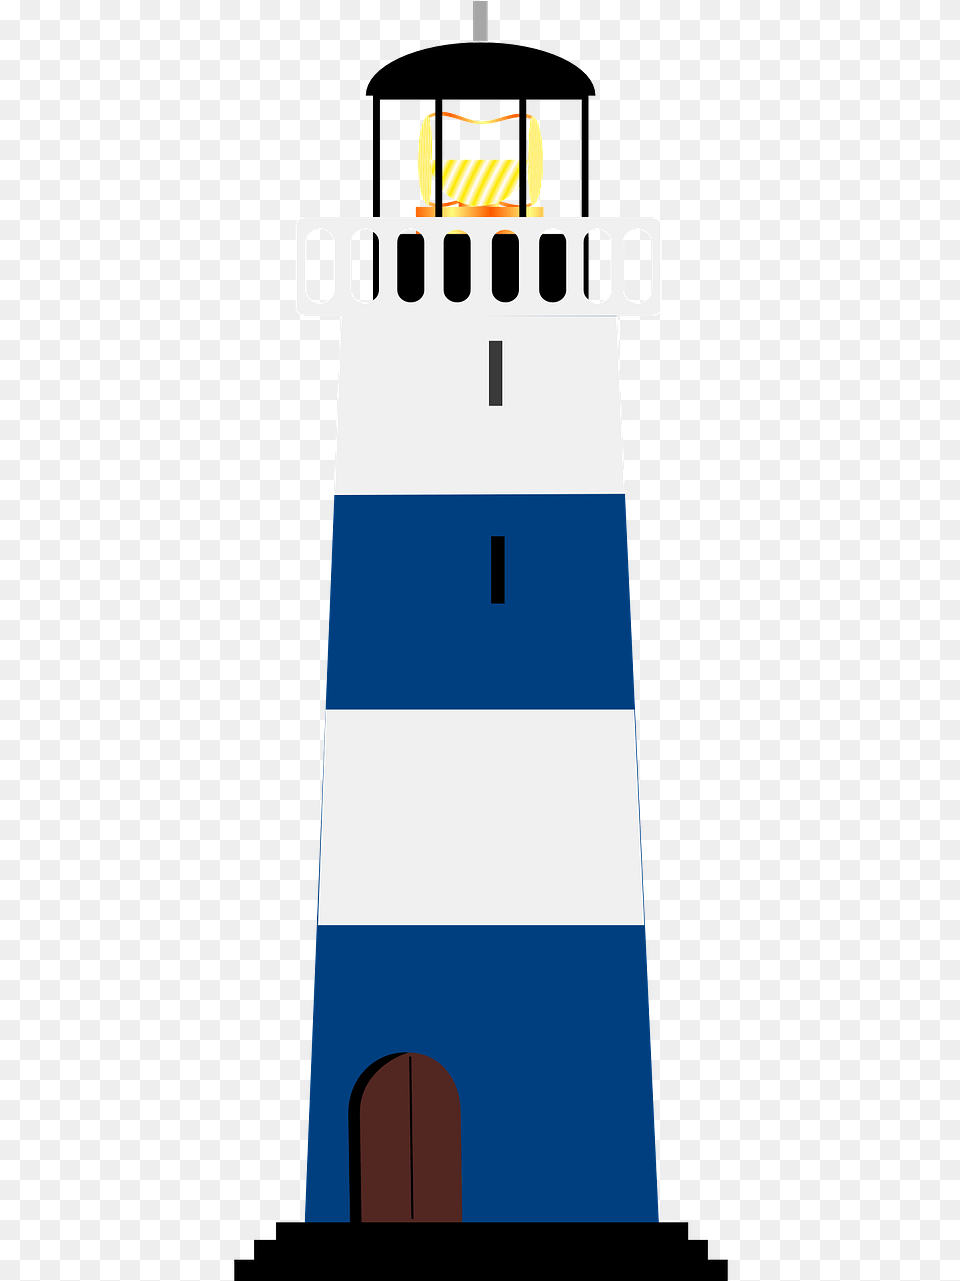 Lighthouse Blue White Vector Graphic On Pixabay Lighthouse Clip Art, Architecture, Building, Tower, Beacon Png